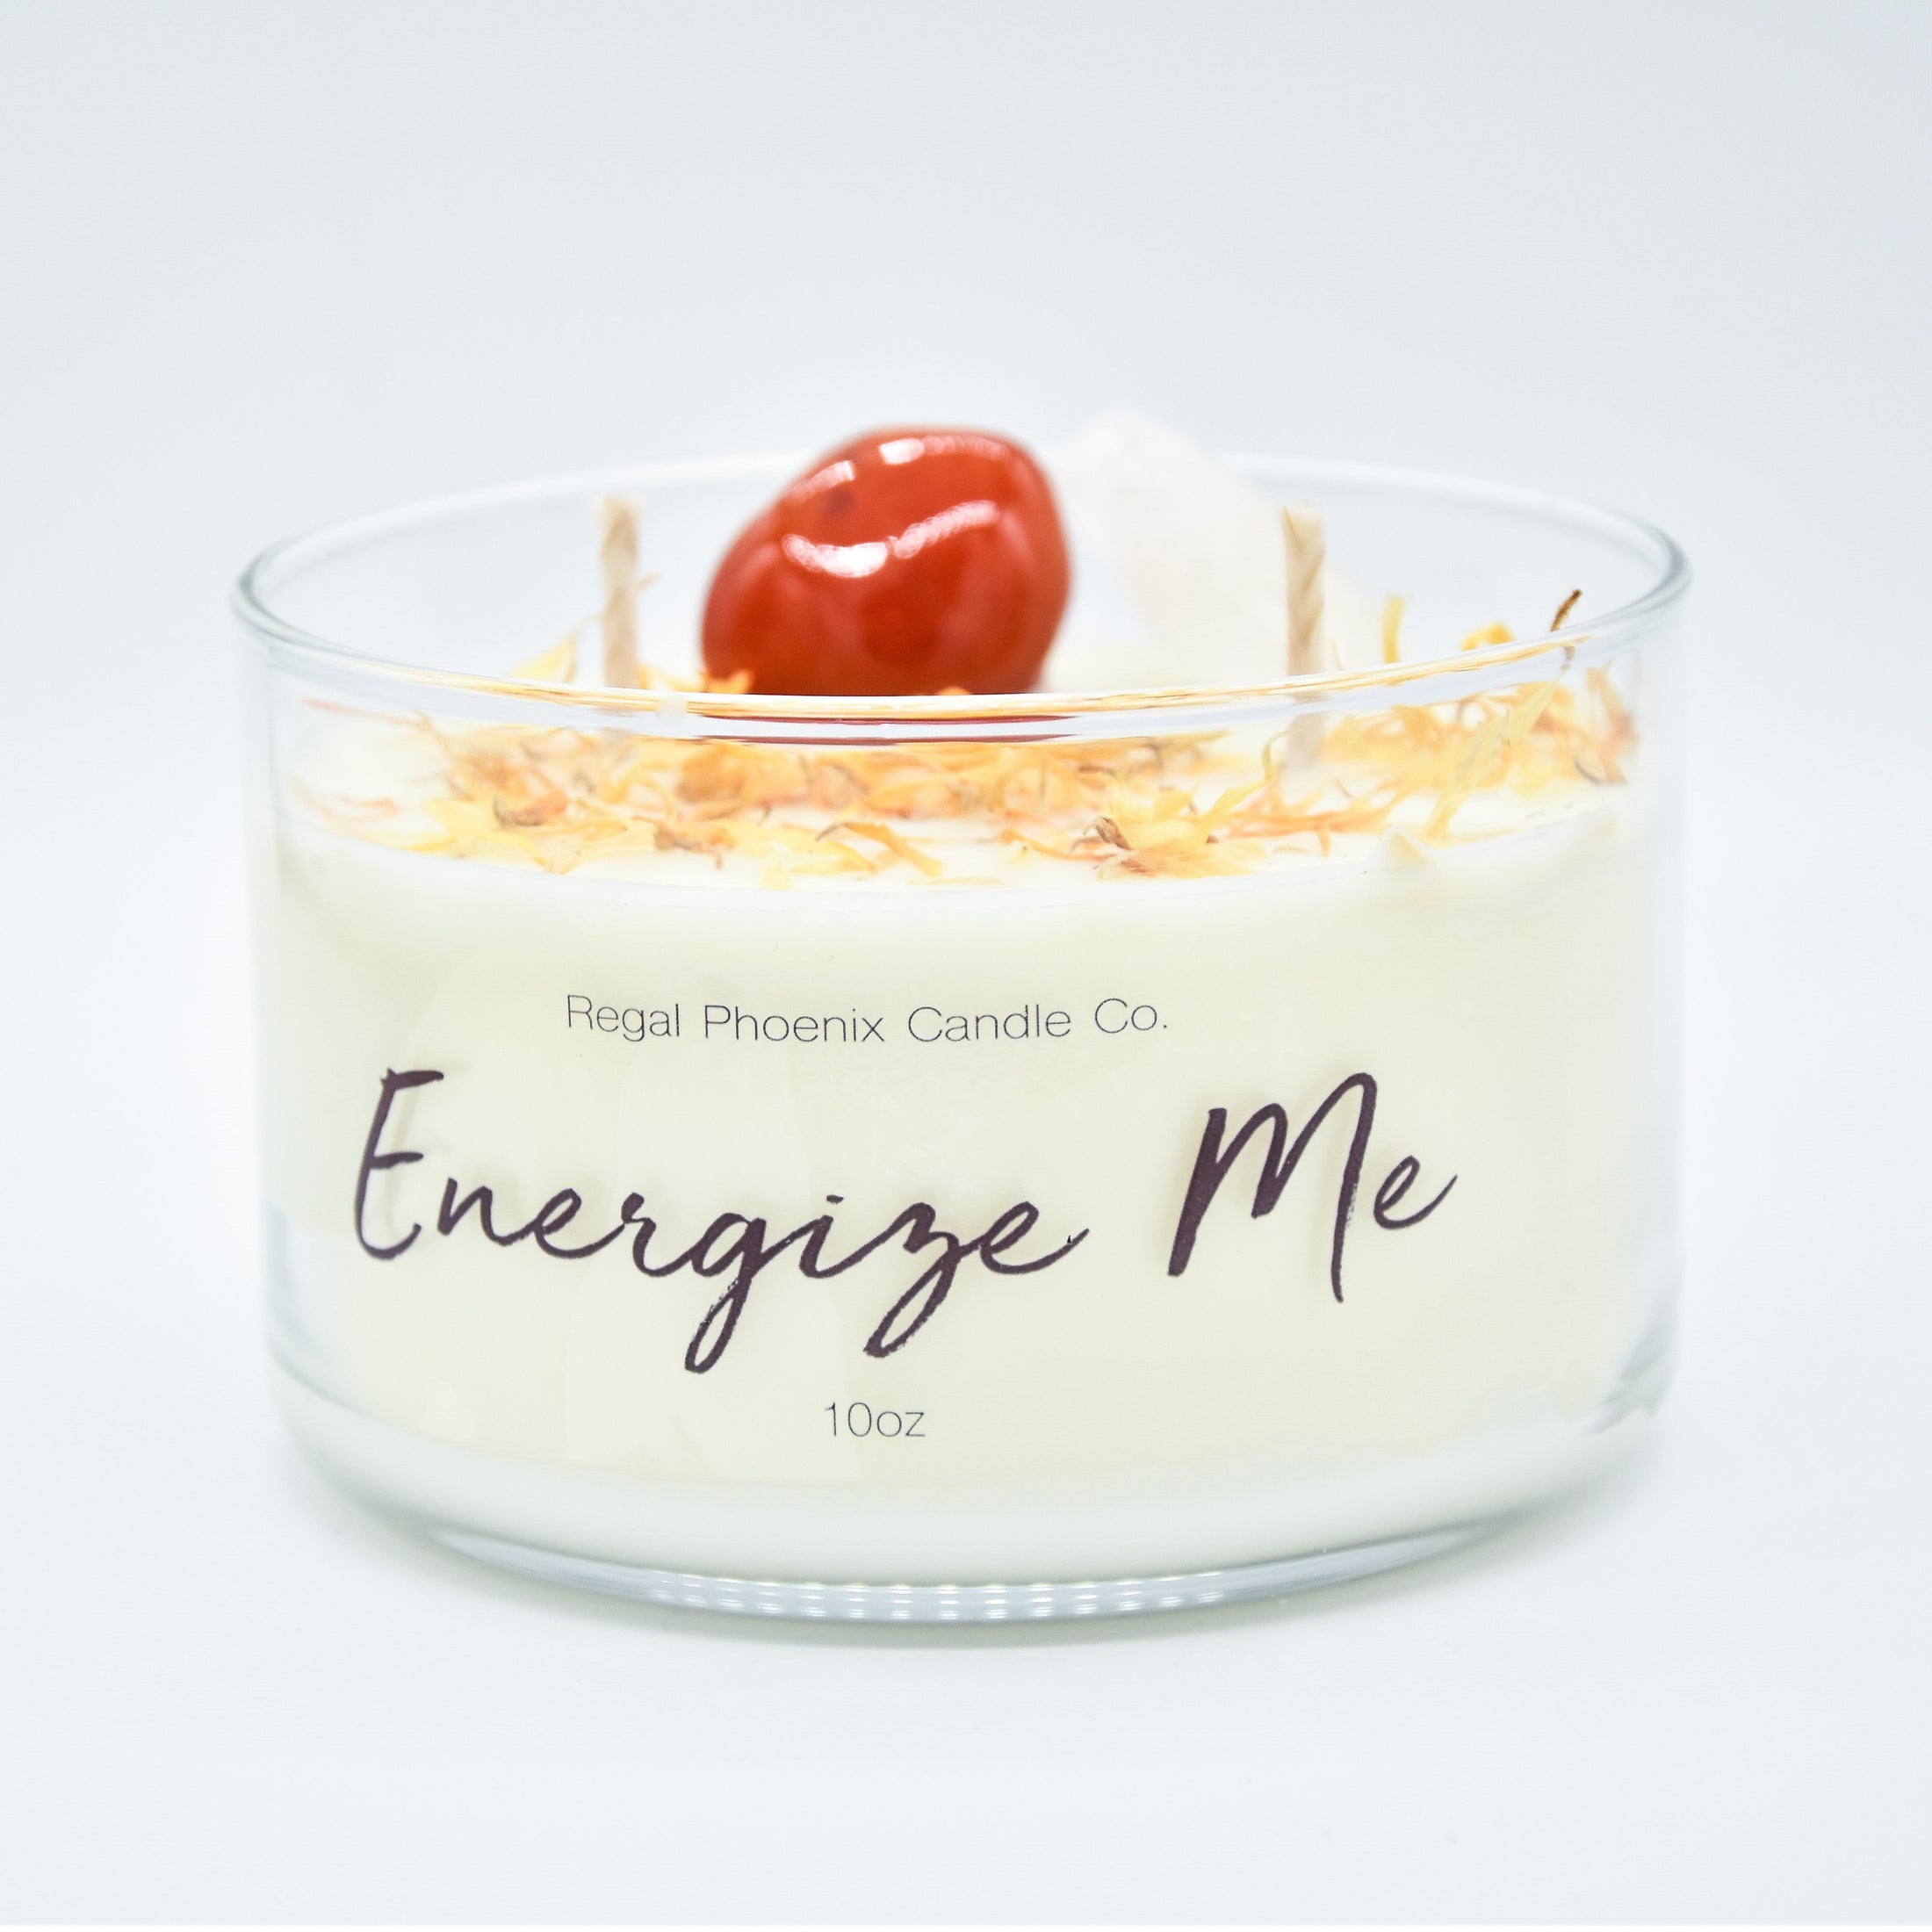 "Energize Me" Crystal Infused Soy Candle